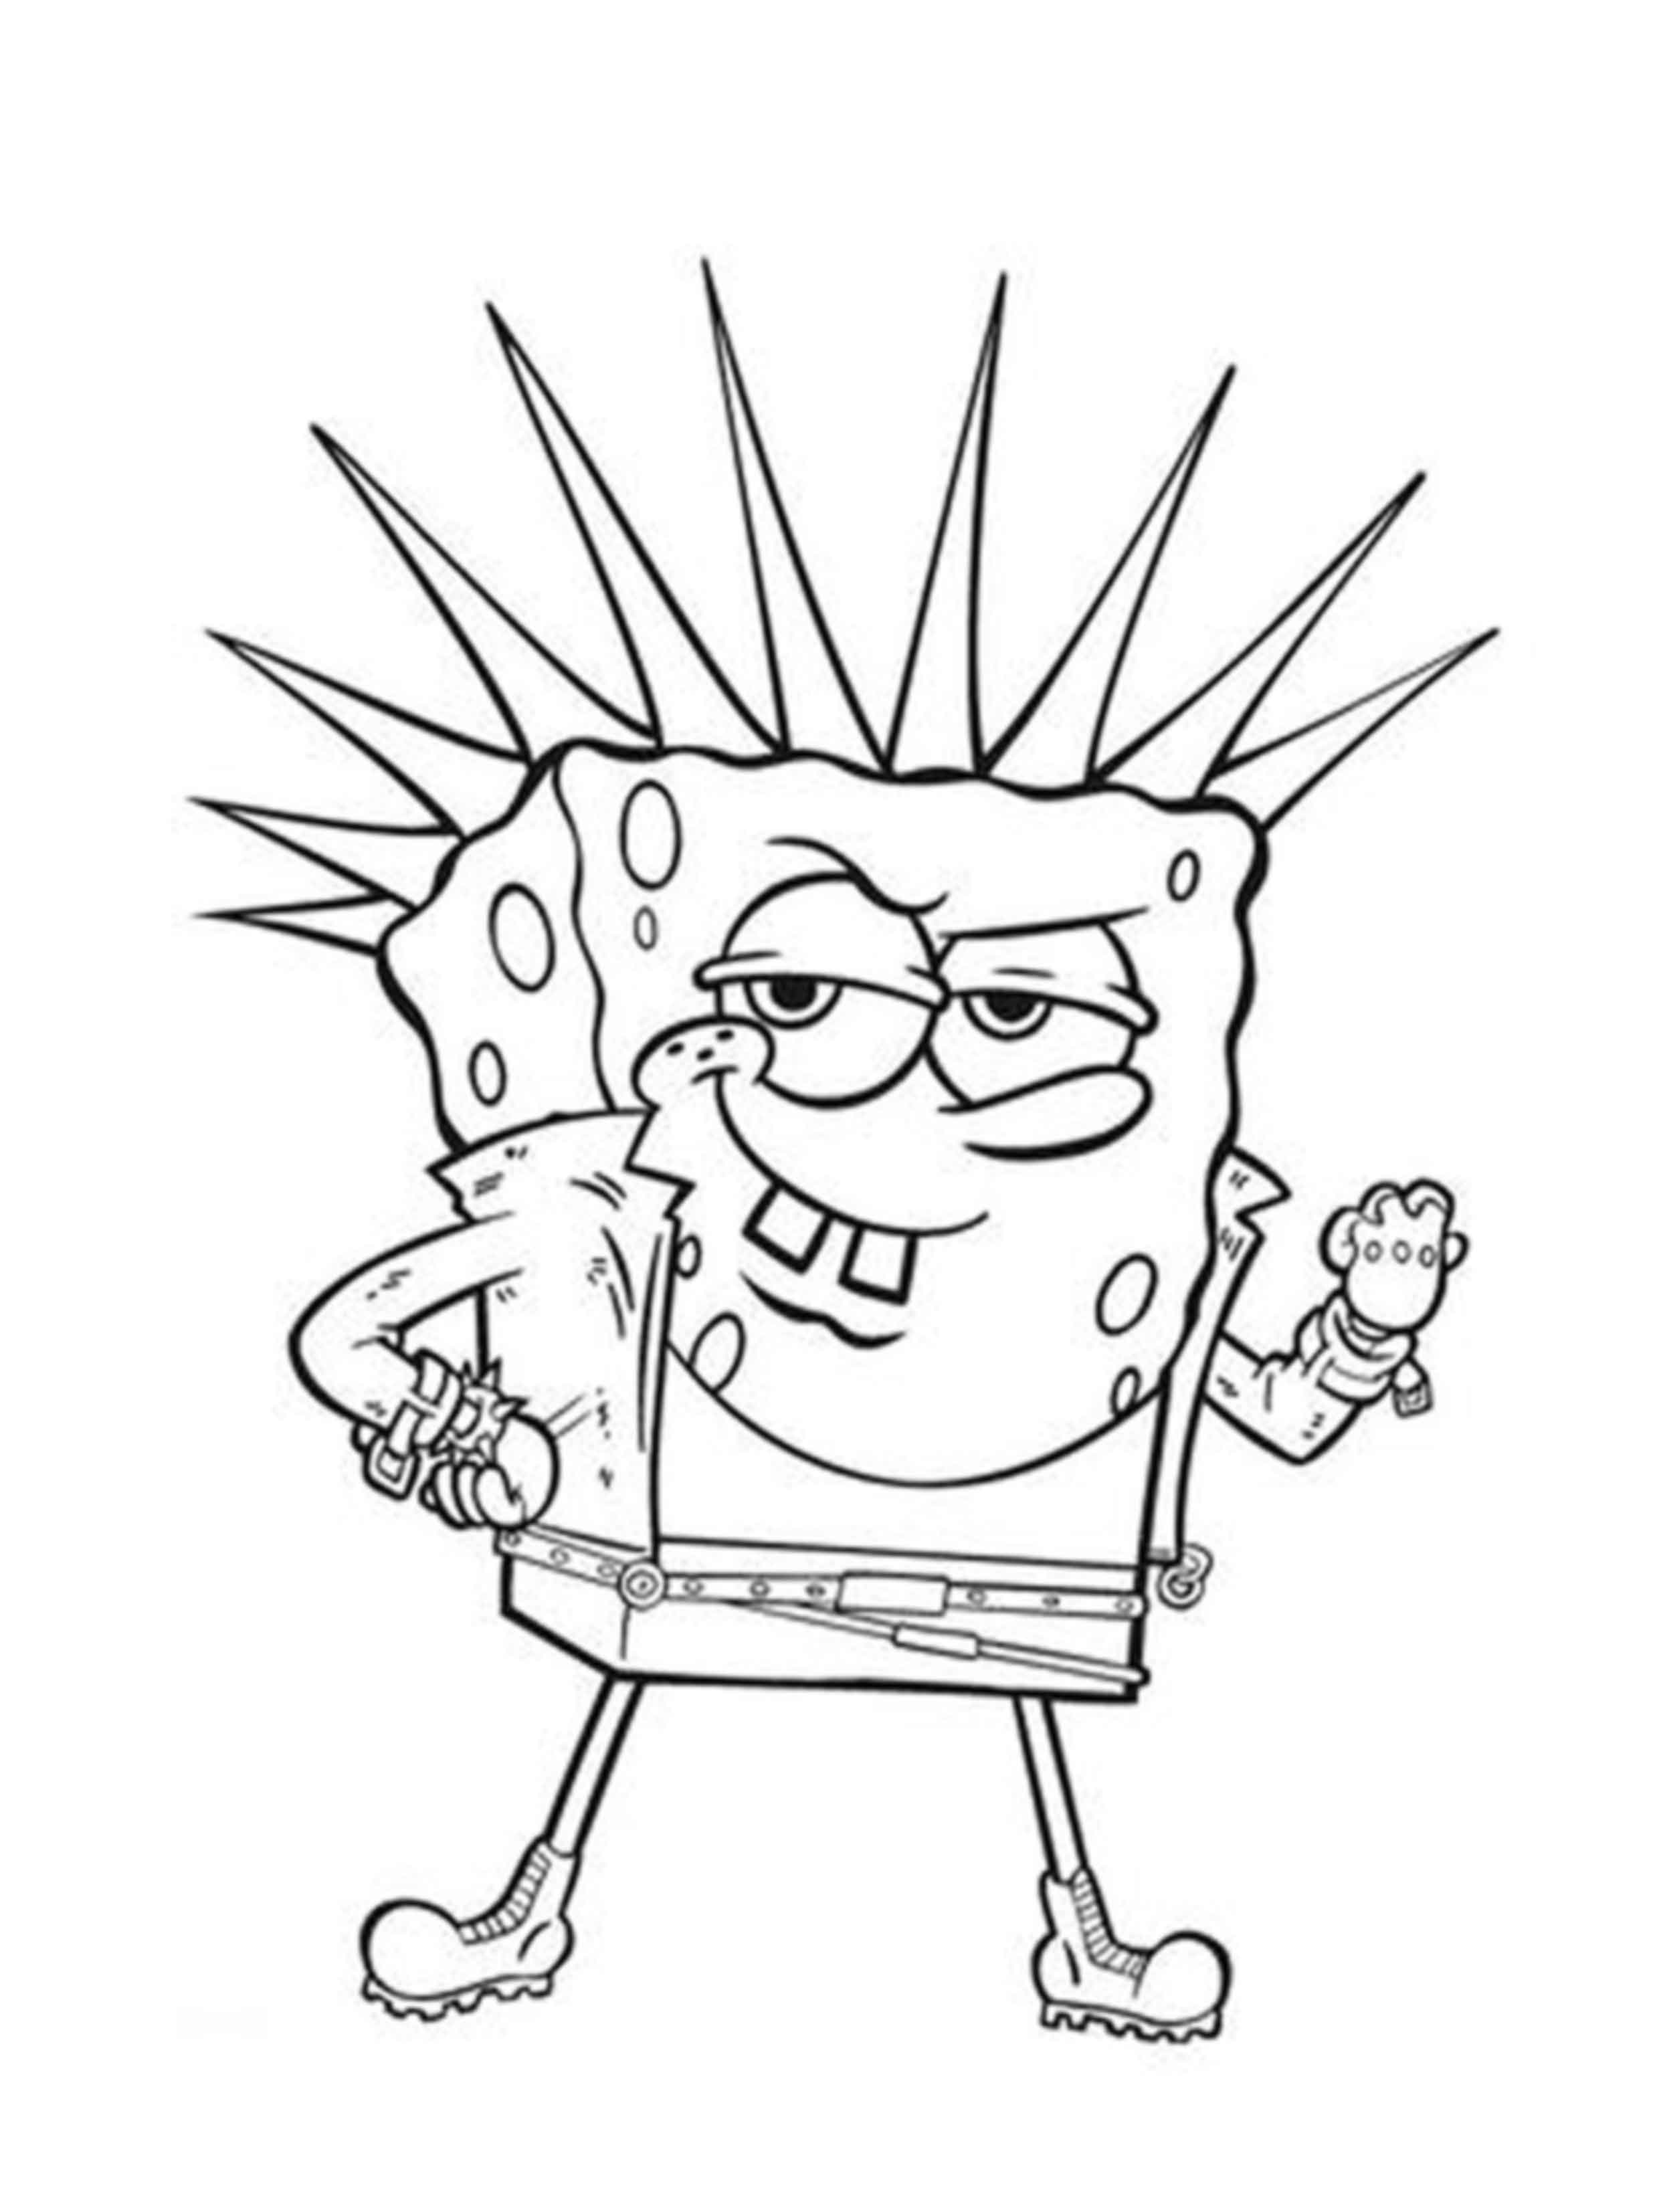 Funny Spongebob Coloring Pages Printables 53